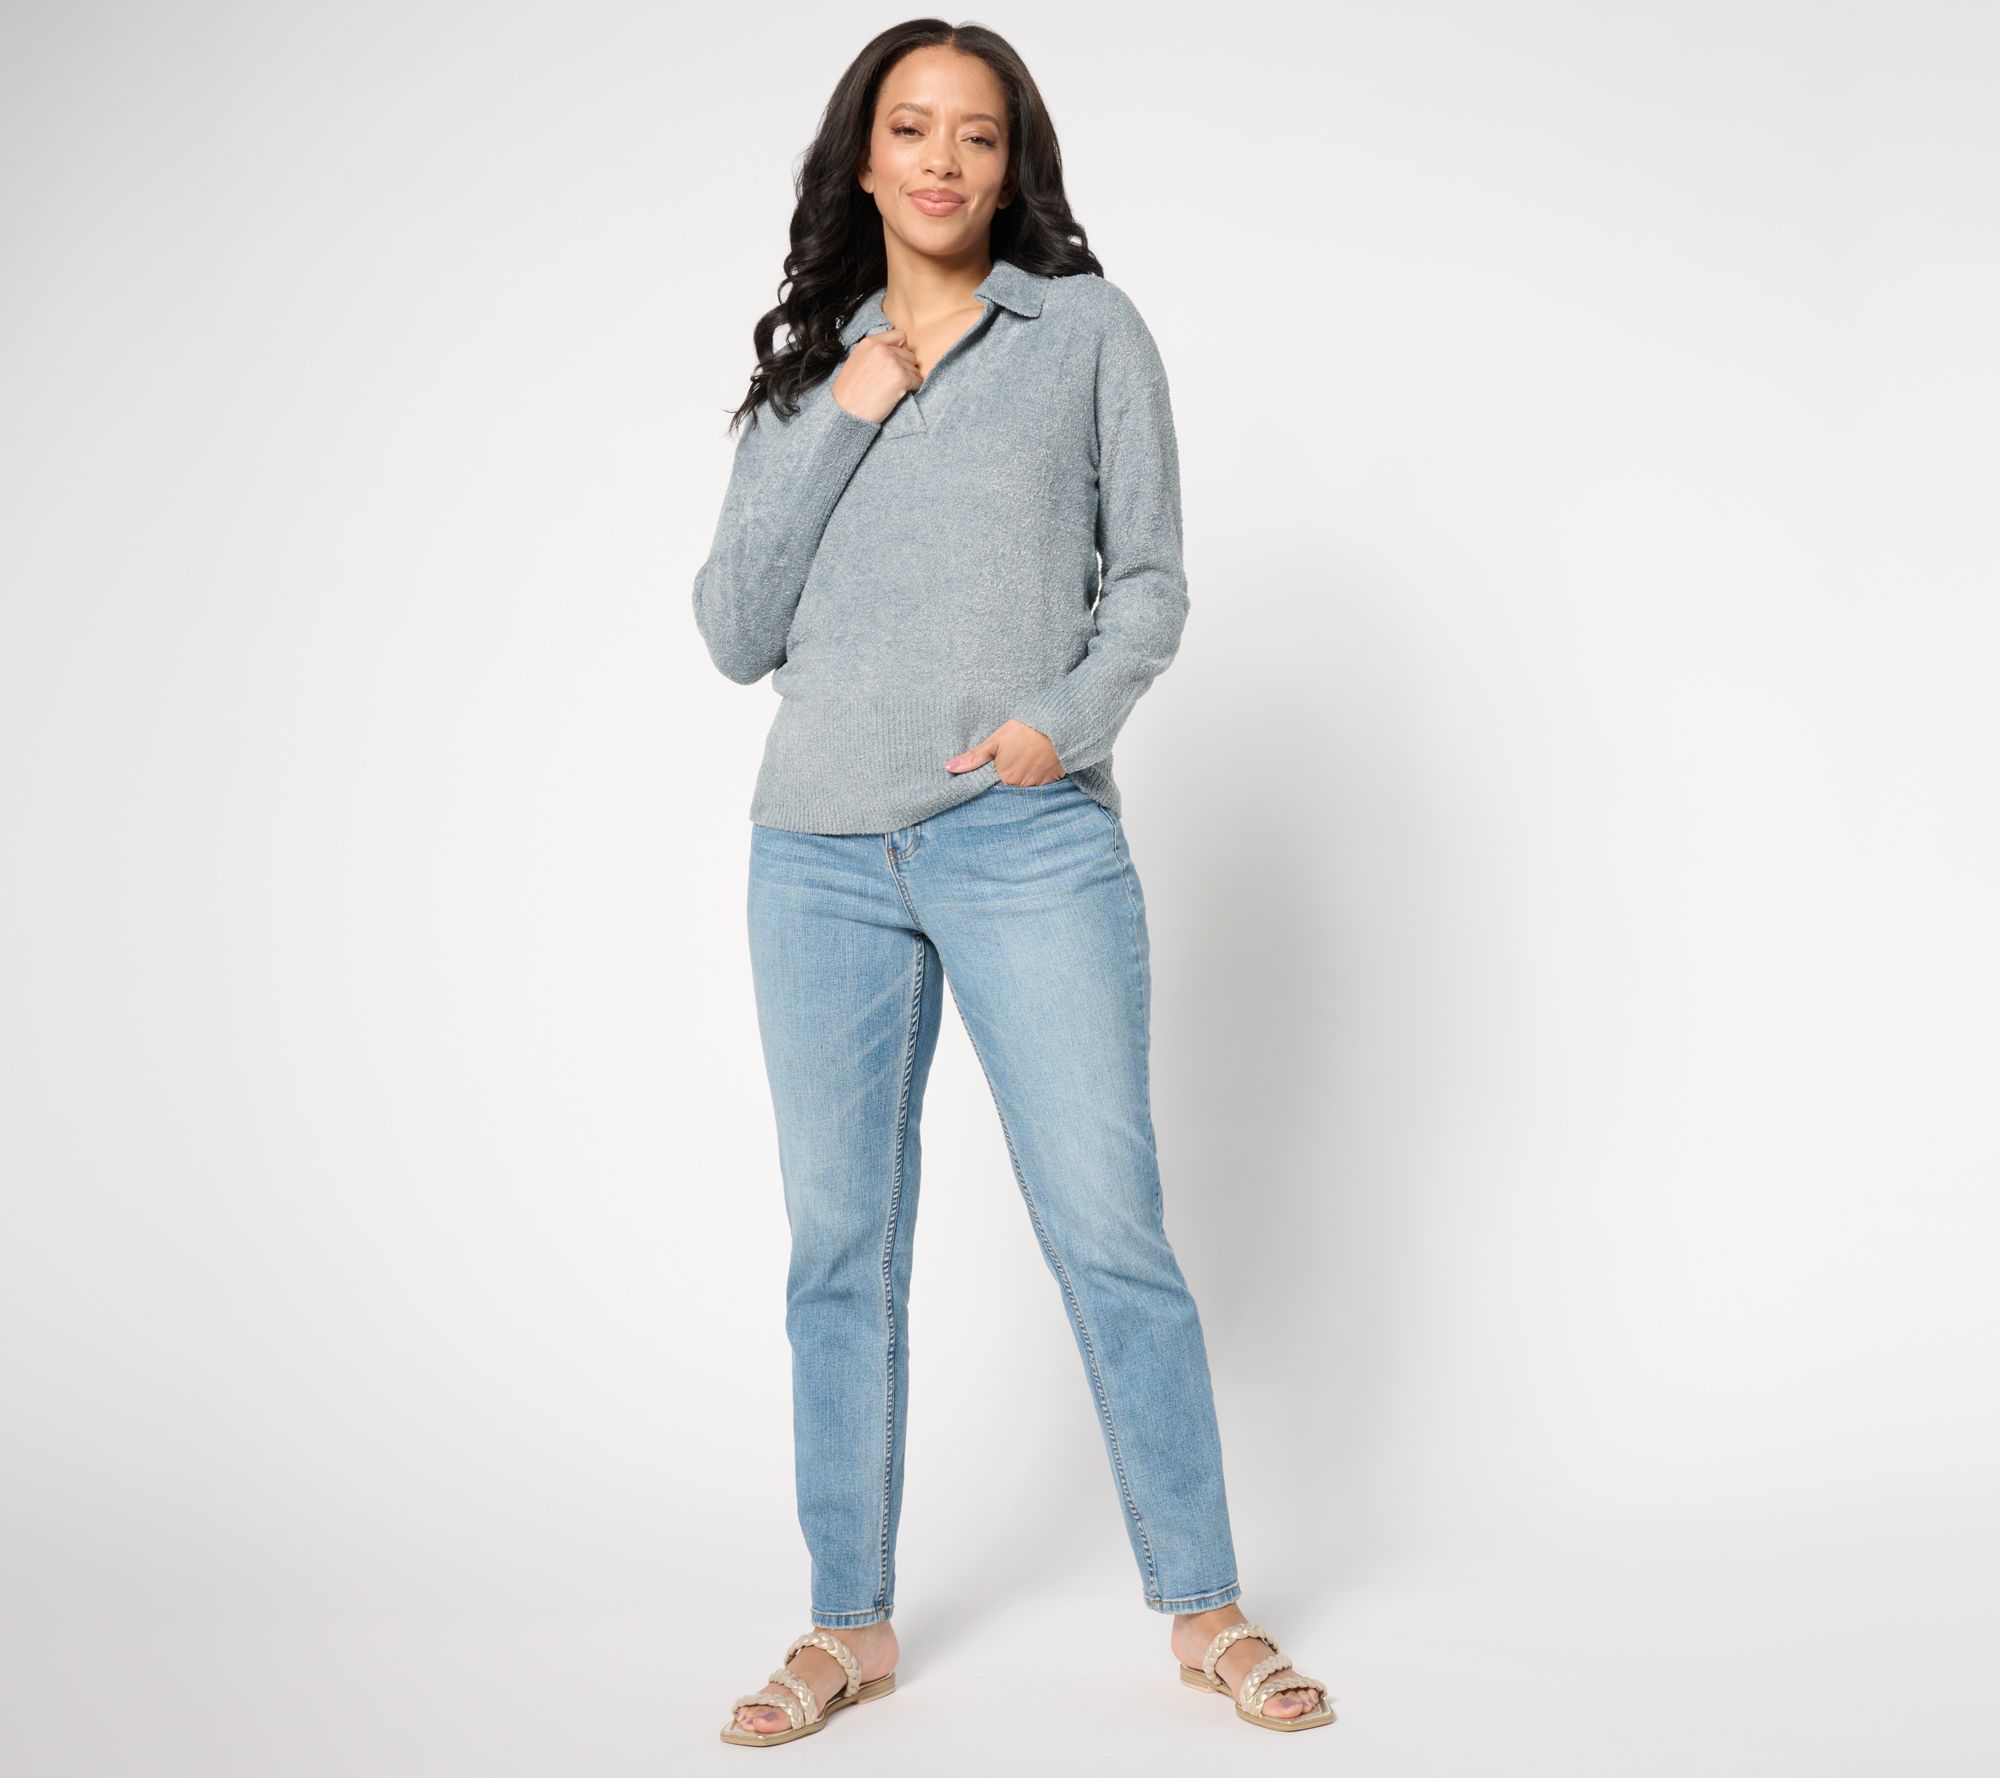 Barefoot Dreams Cozyterry Dolman Pullover in Indigo- Bliss Boutiques